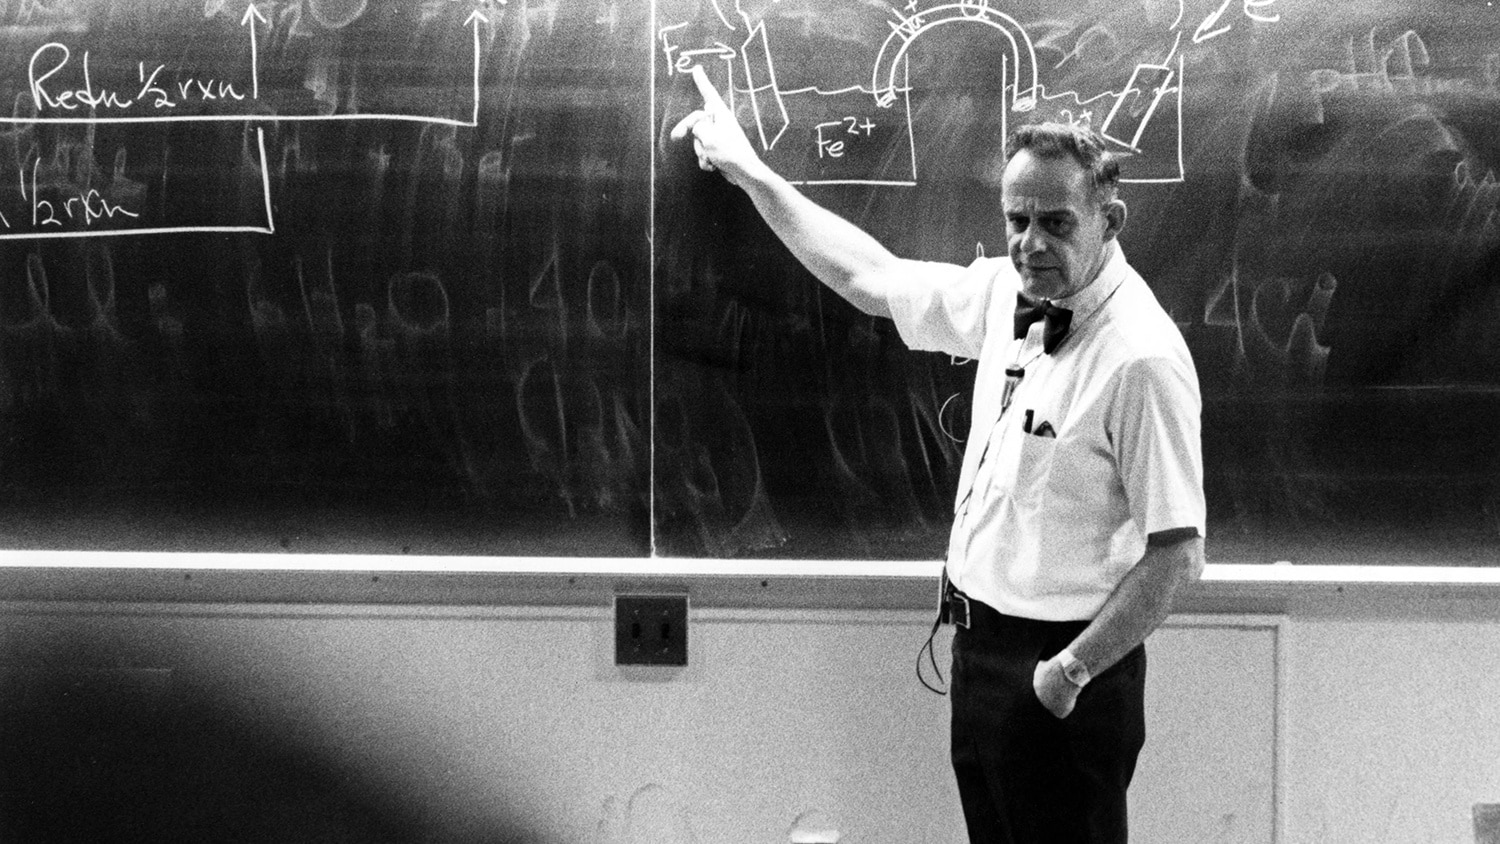 Forrest Hentz at the blackboard in an archival, black-and-white photo.